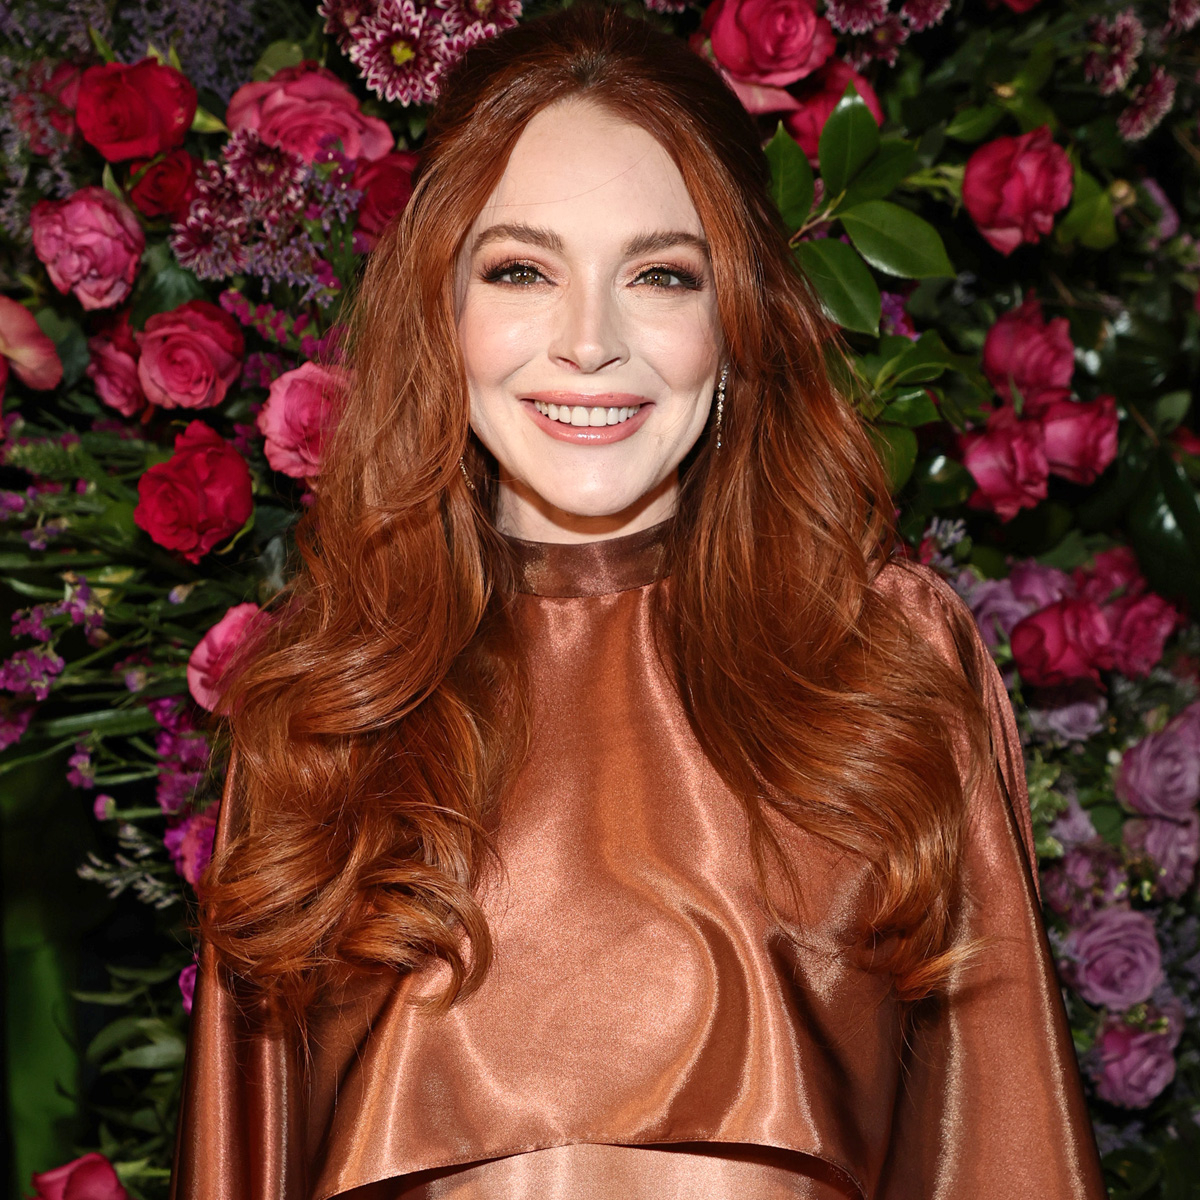 Pregnant Lindsay Lohan Debuts Her Baby Bump in First Photo